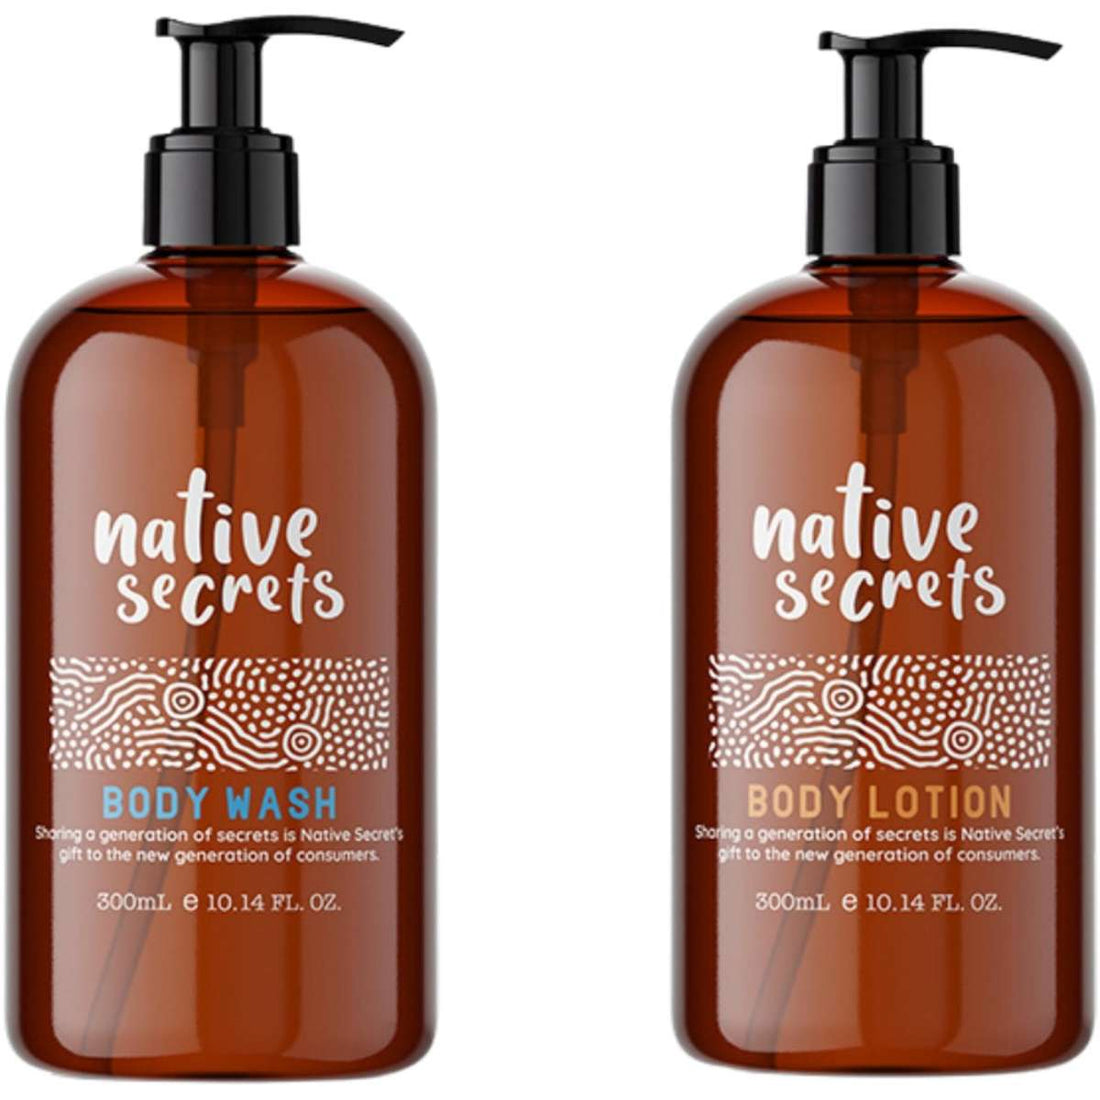 Native Secrets Australian Made Body Wash and Body Lotion 300ml - 2 Pack